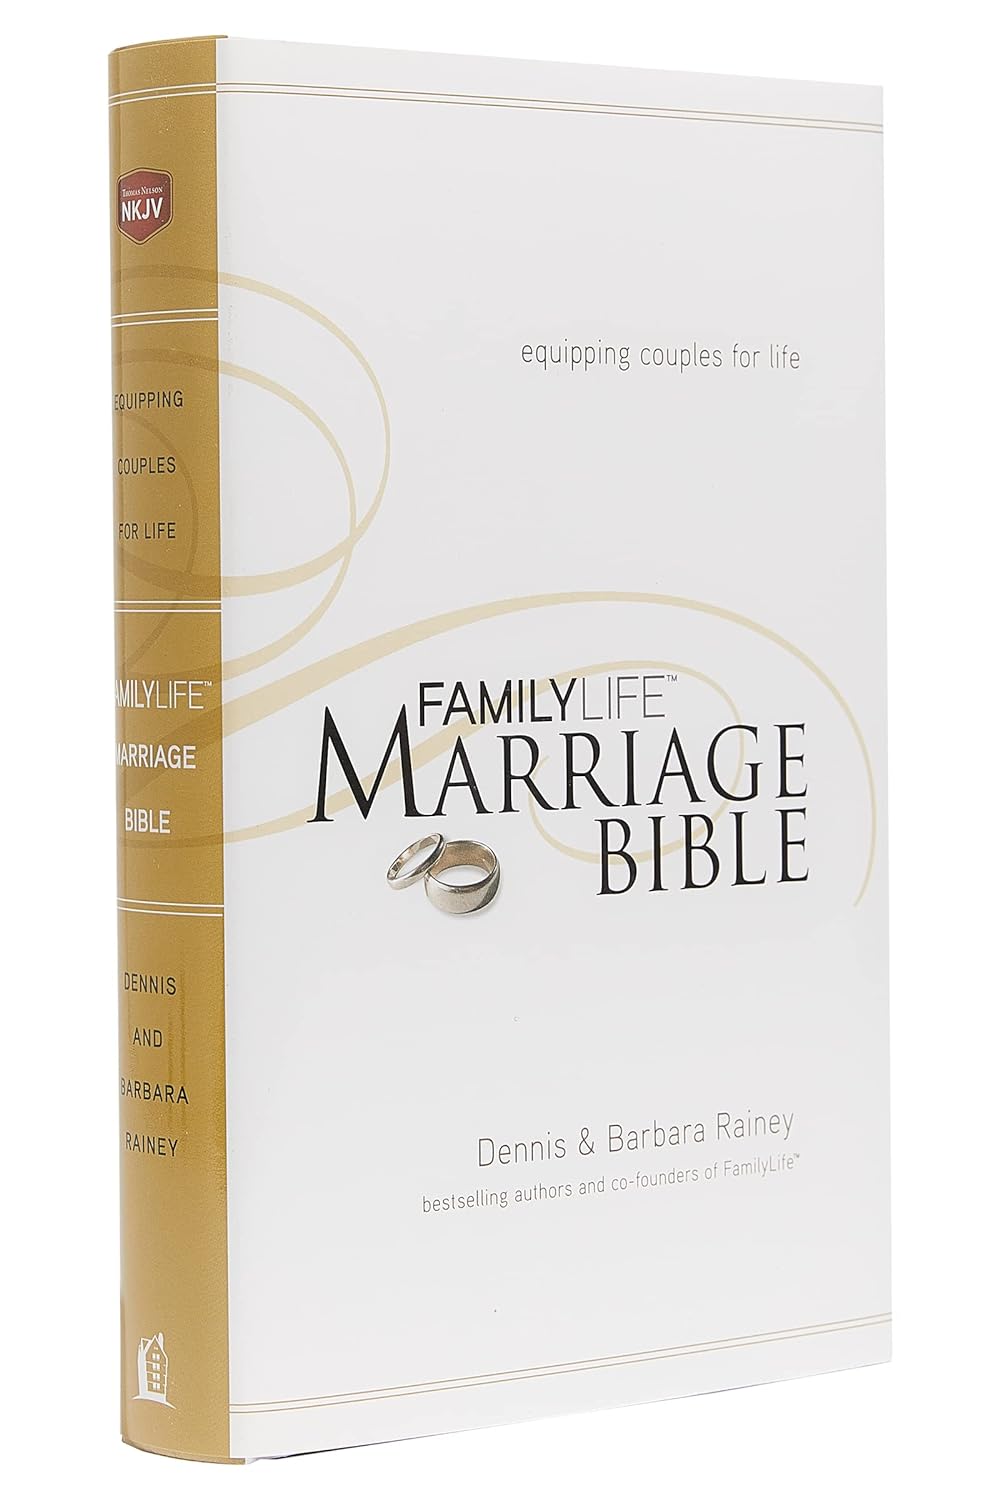 NKJV, FamilyLife Marriage Bible, Hardcover: Equipping Couples for Life (Bible Nkjv) Hardcover